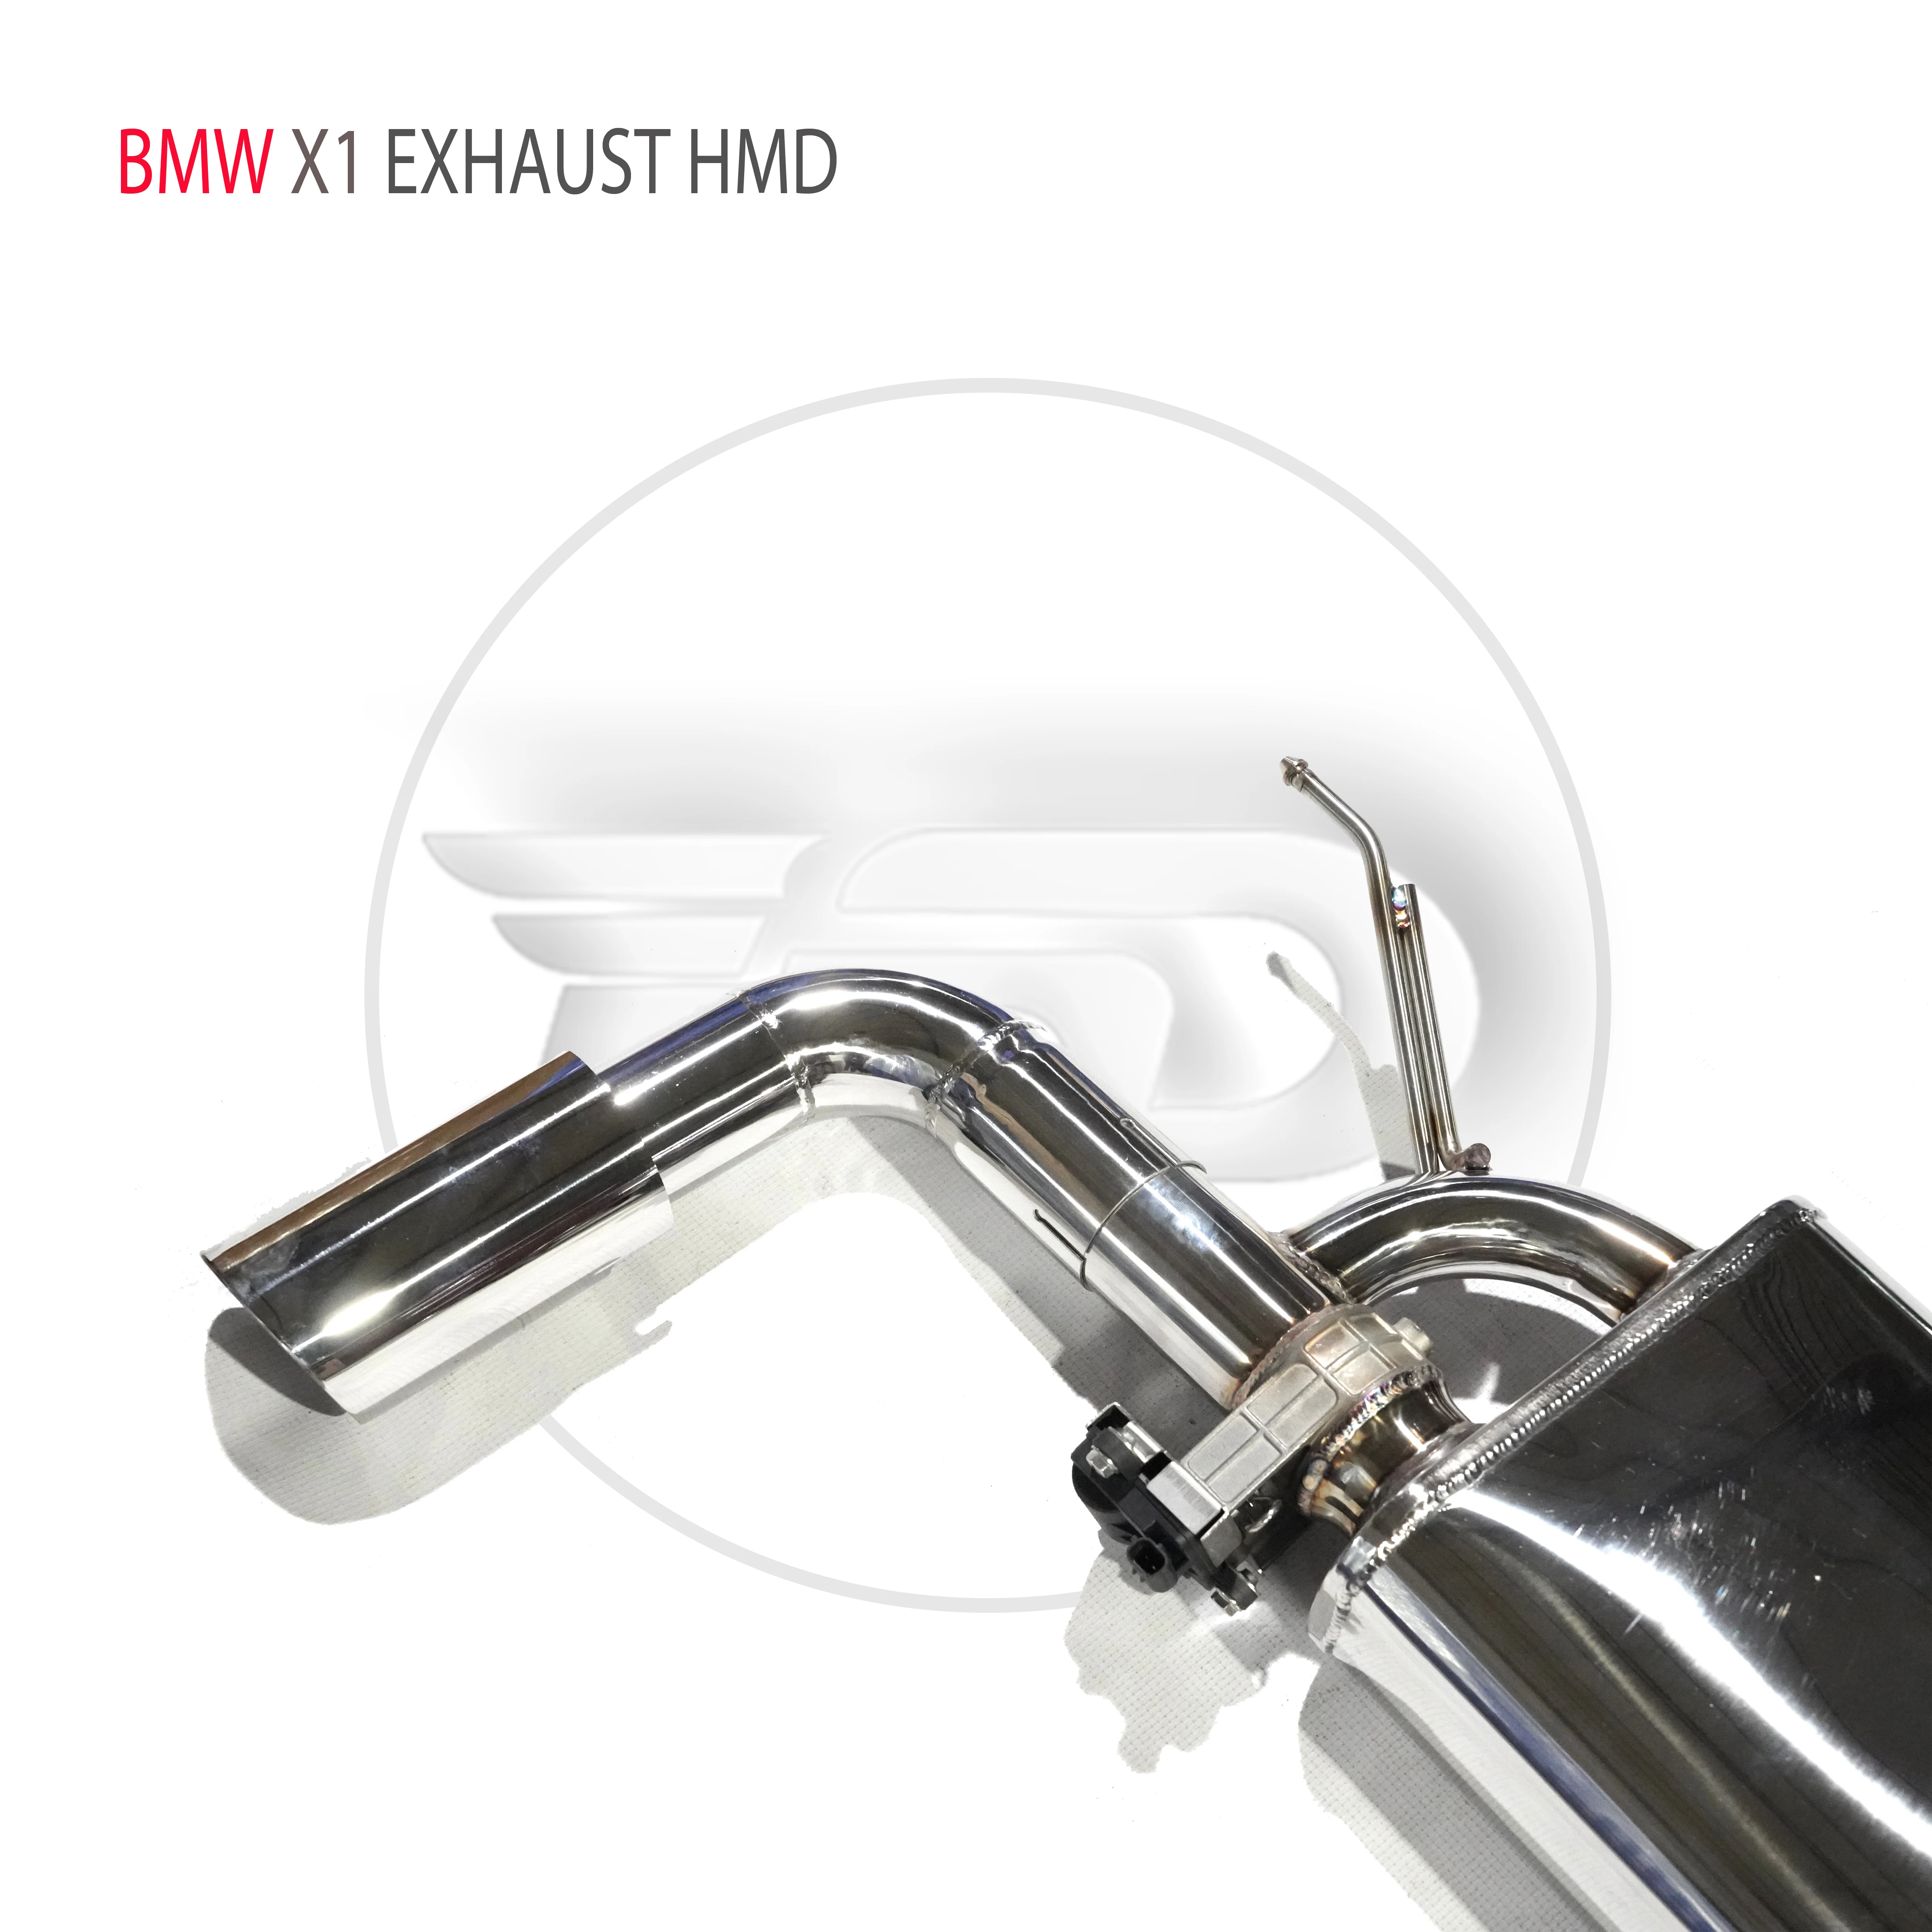 HMD Stainless Steel Exhaust System Performance Catback for BMW X1 2012+ Auto Replacement Modification Electronic Valve